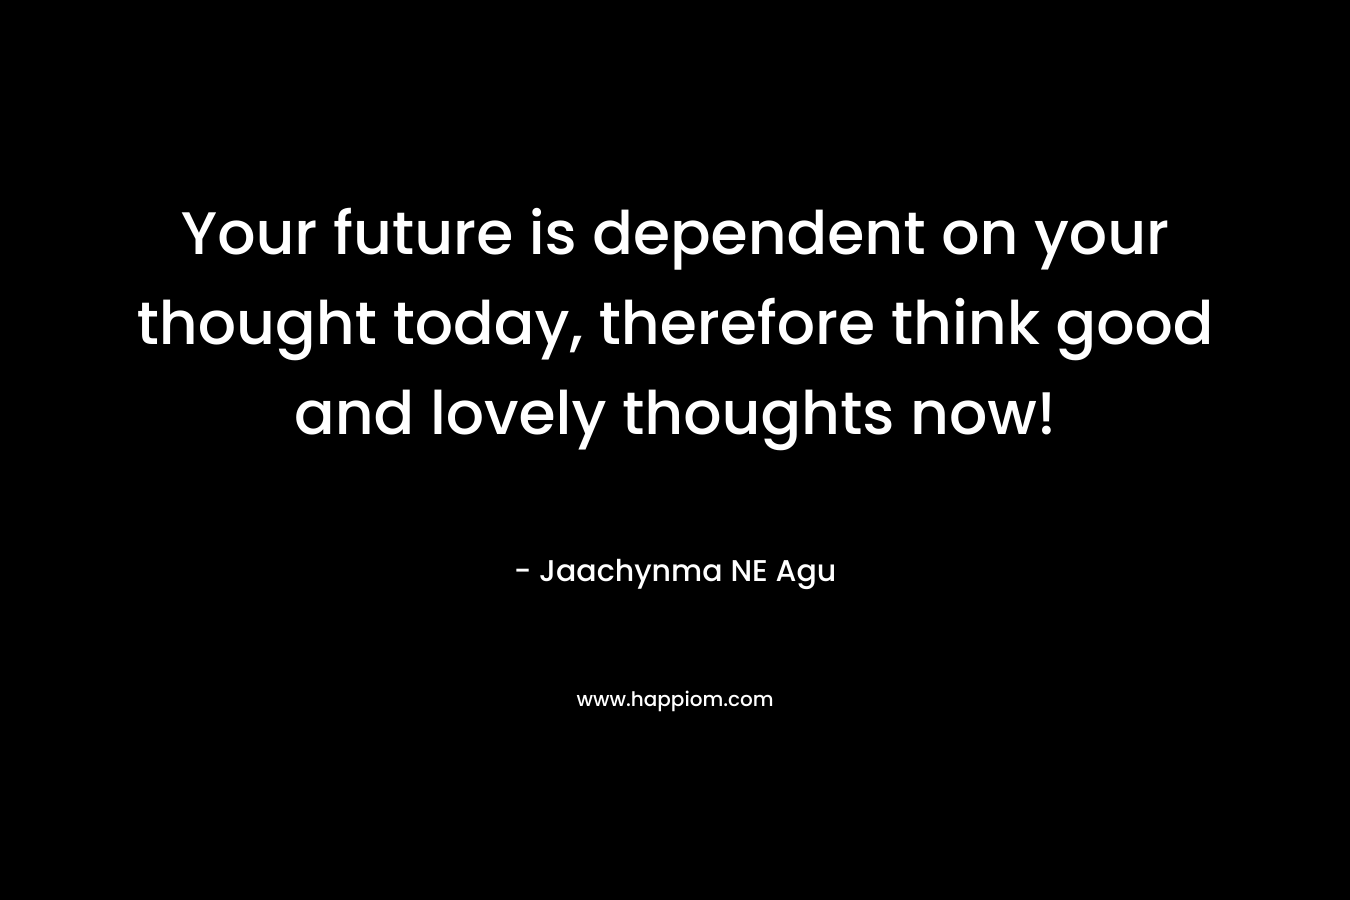 Your future is dependent on your thought today, therefore think good and lovely thoughts now!